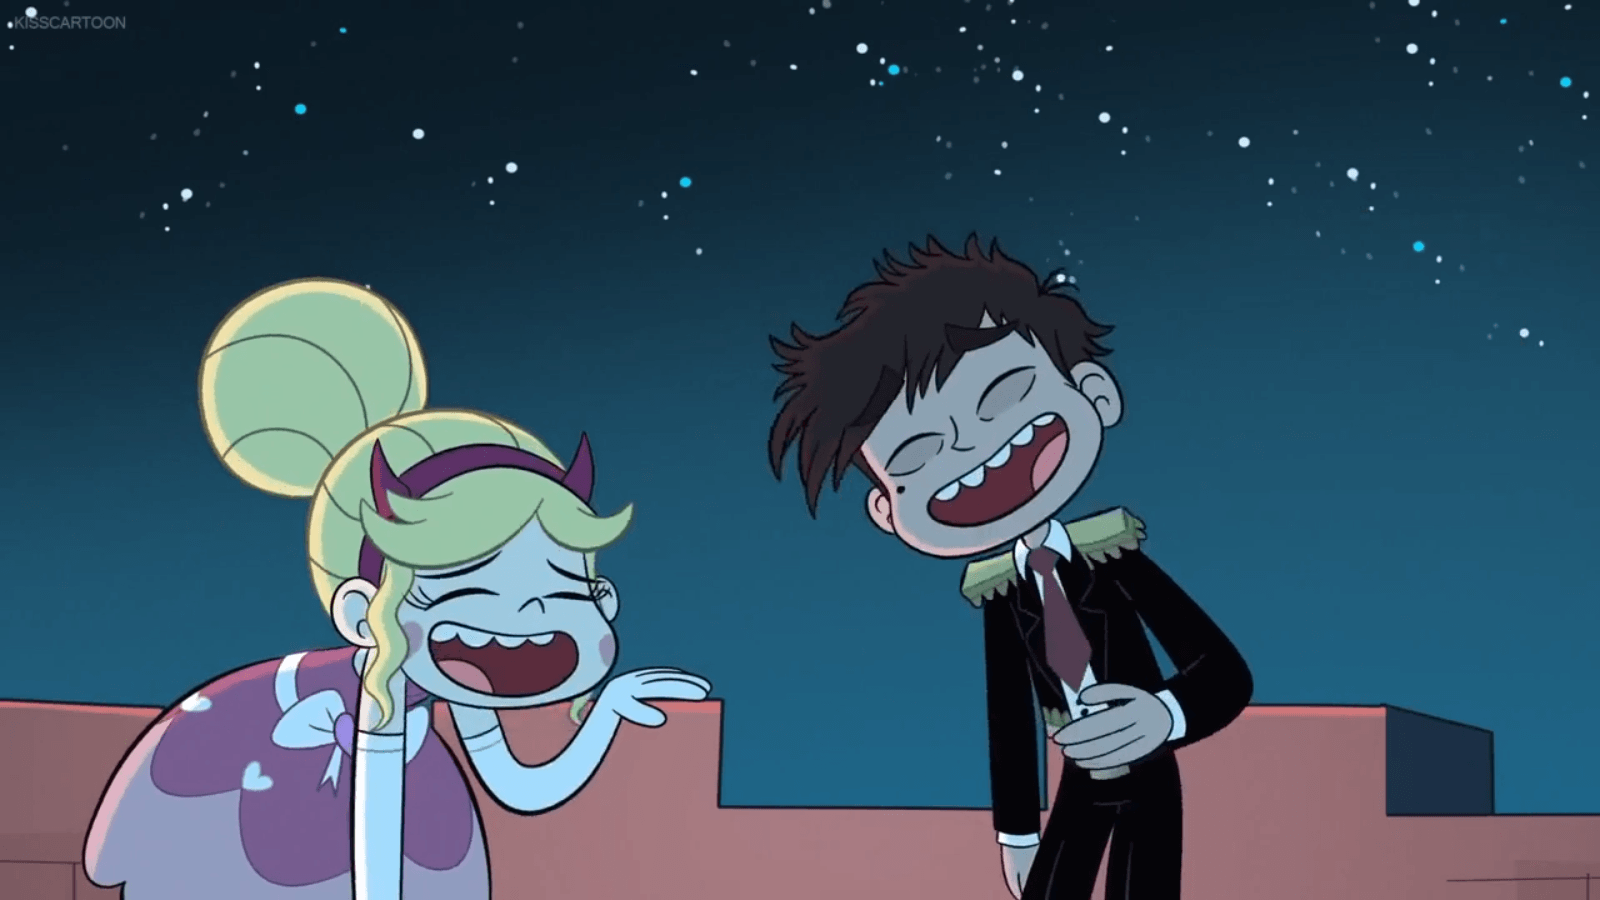 Star Vs. the Forces of Evil Wallpapers